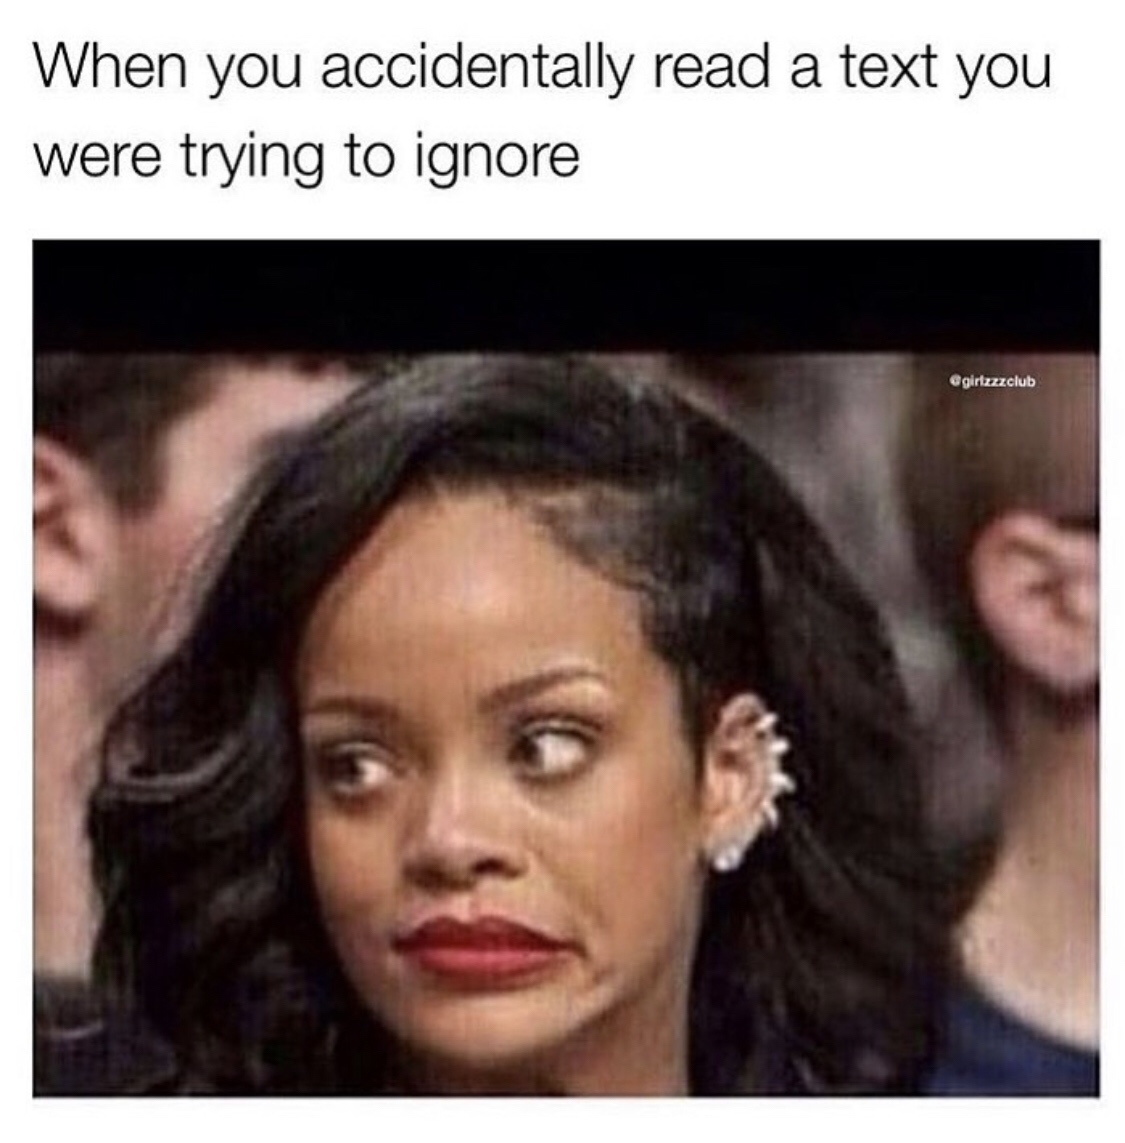 rihanna captions - When you accidentally read a text you were trying to ignore